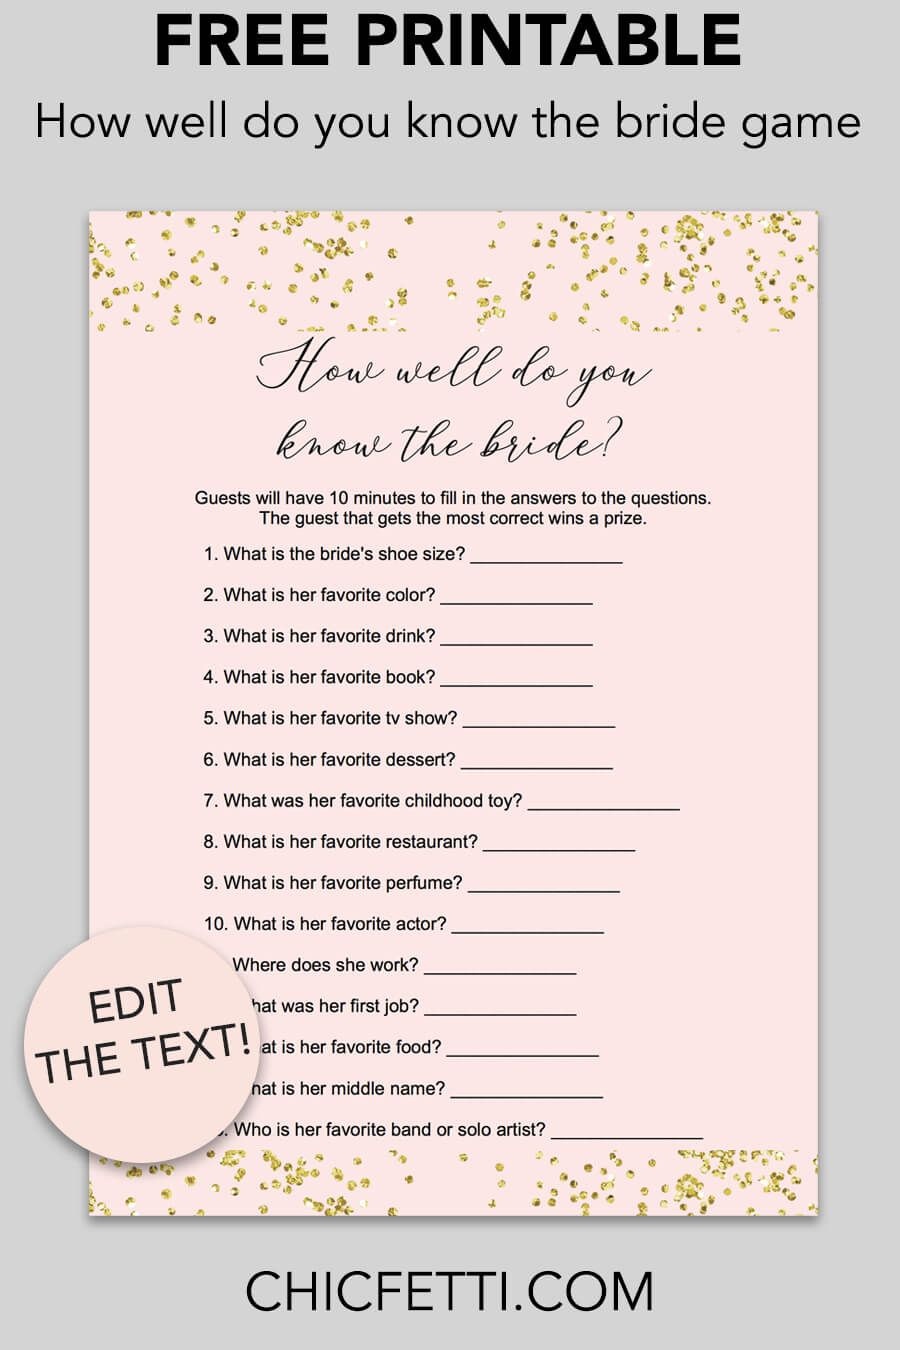 Blush And Confetti How Well Do You Know The Bride Game | Free - How Well Do You Know The Bride Game Free Printable